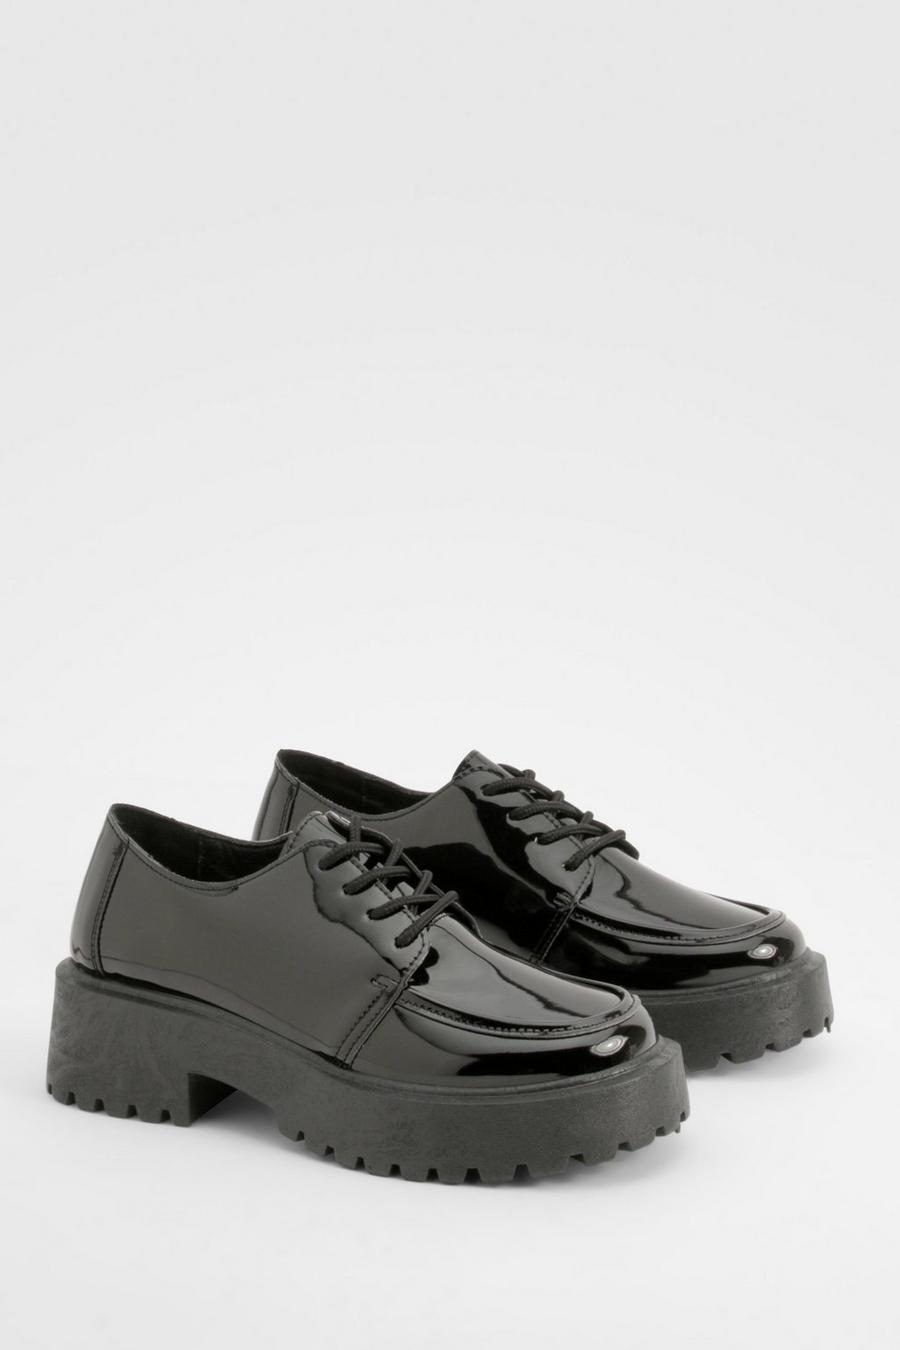 Black Patent  Lace Up Chunky Sole customization Shoes